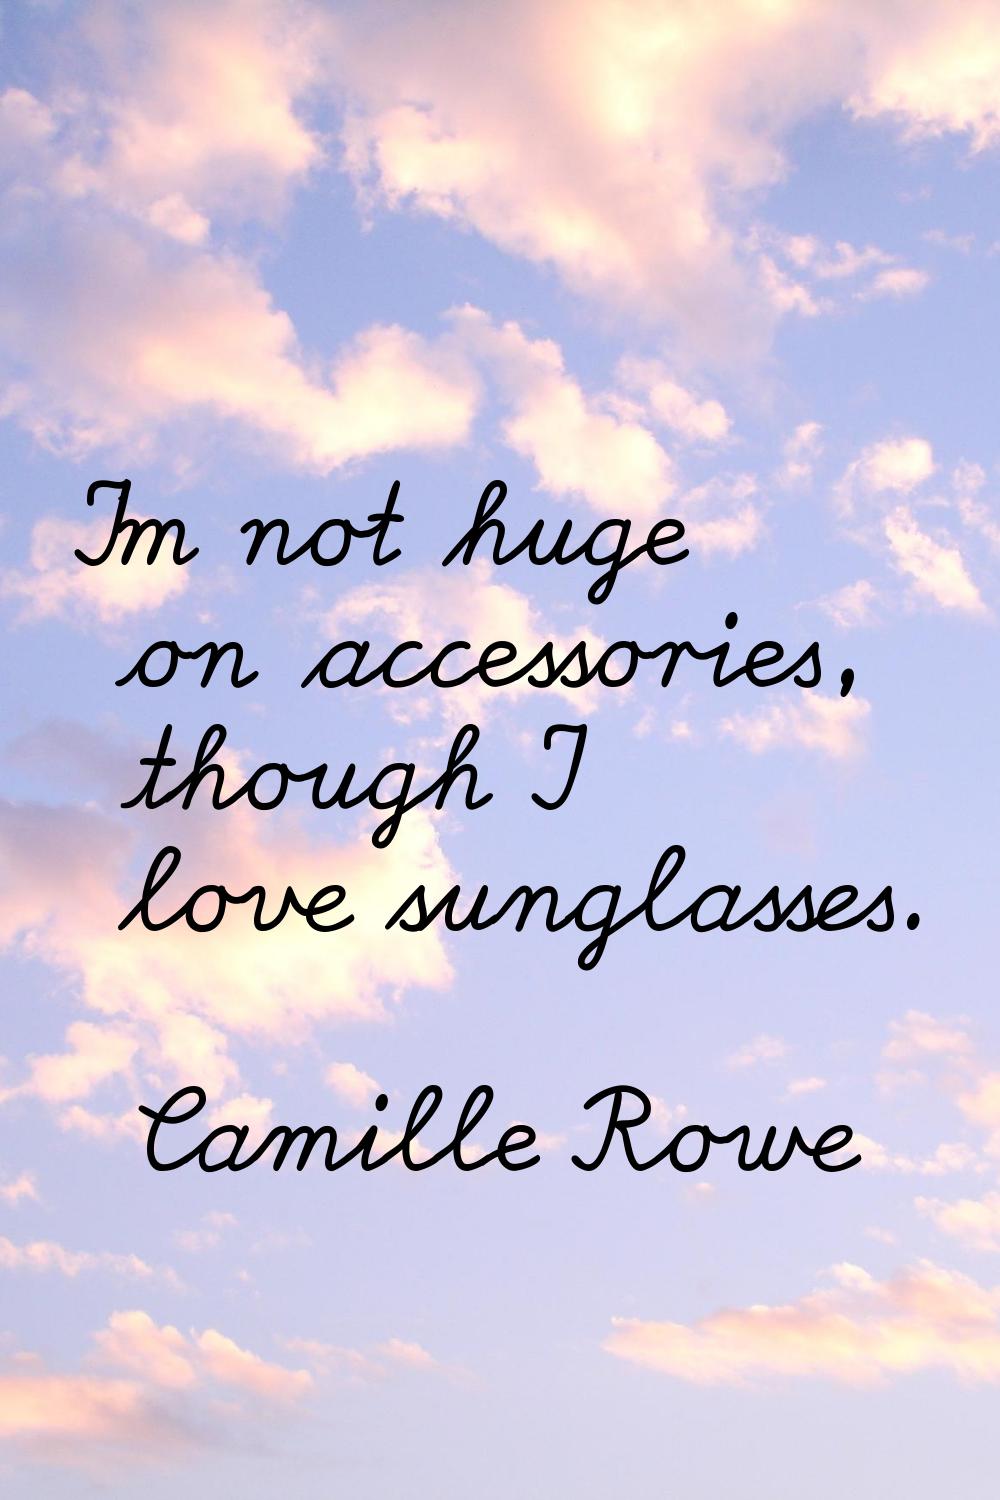 I'm not huge on accessories, though I love sunglasses.